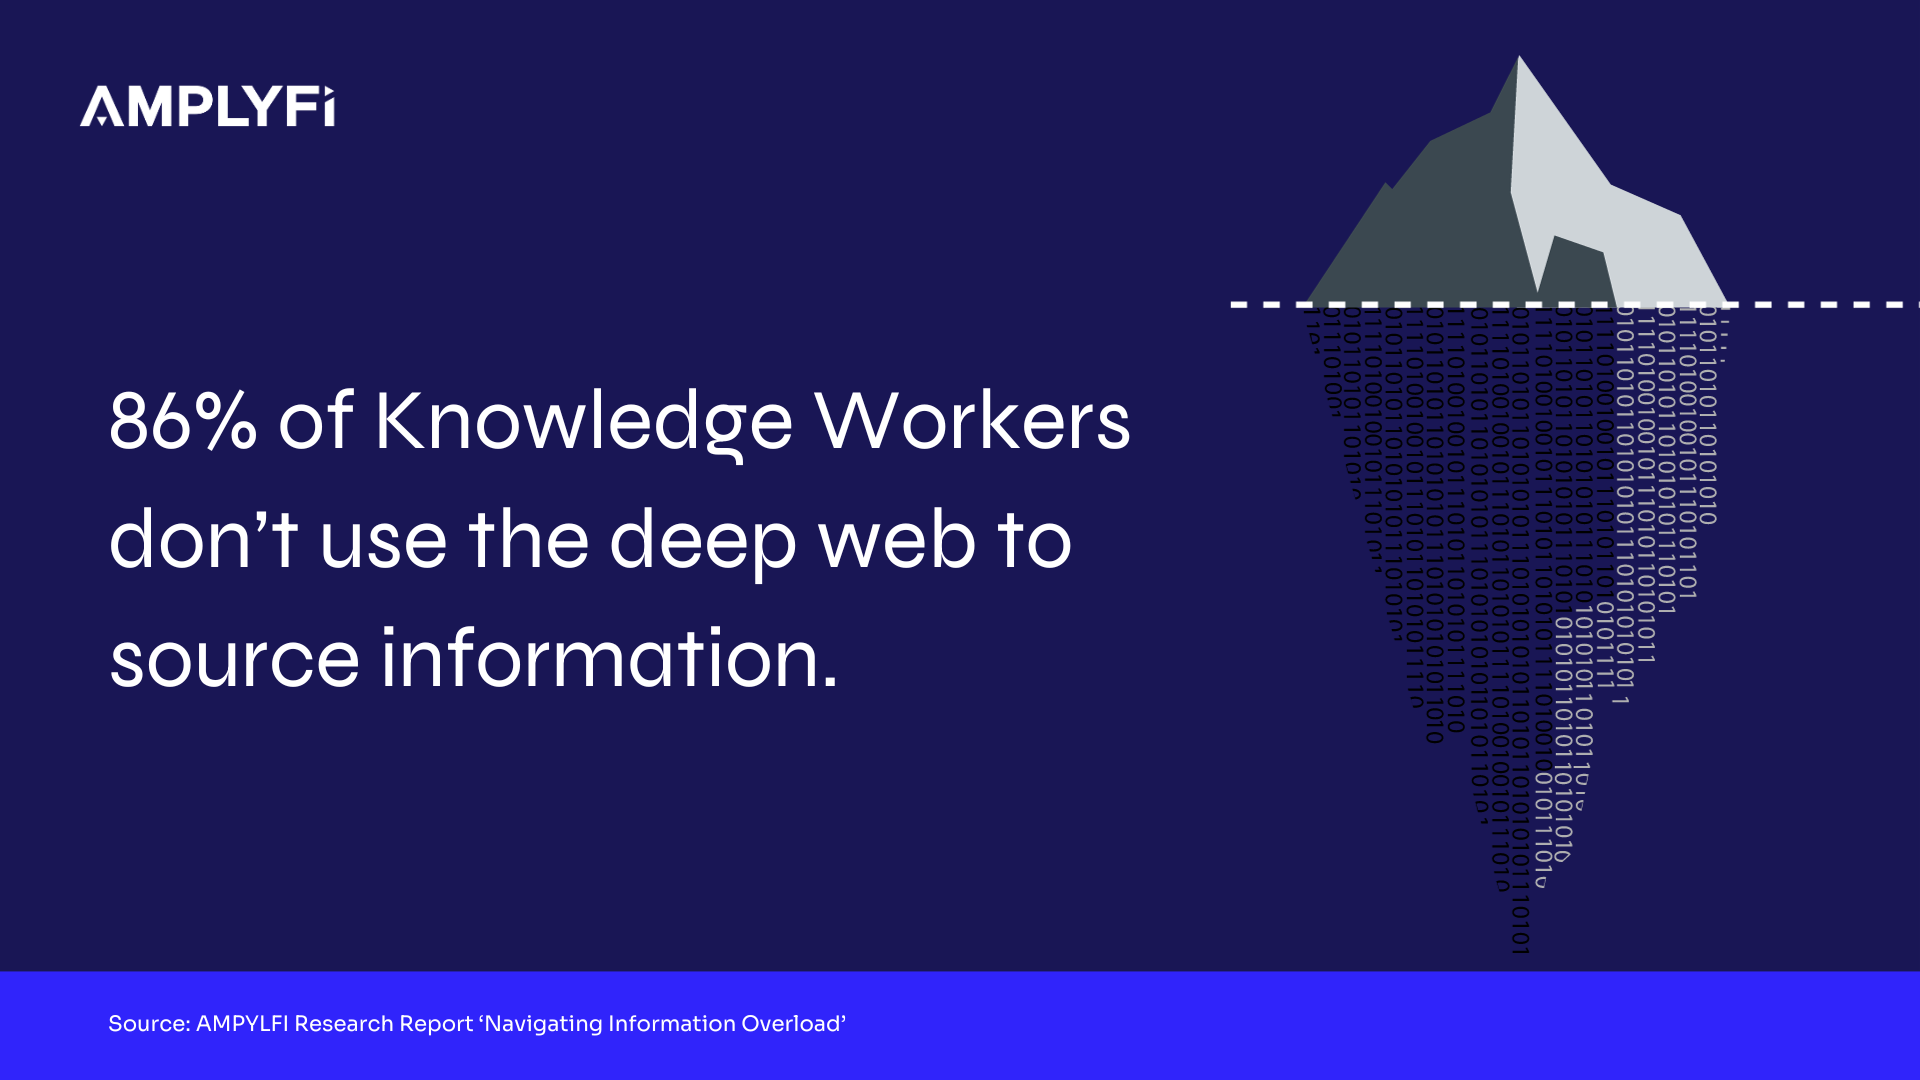 86% of Knowledge Workers don’t use the deep web to source information.